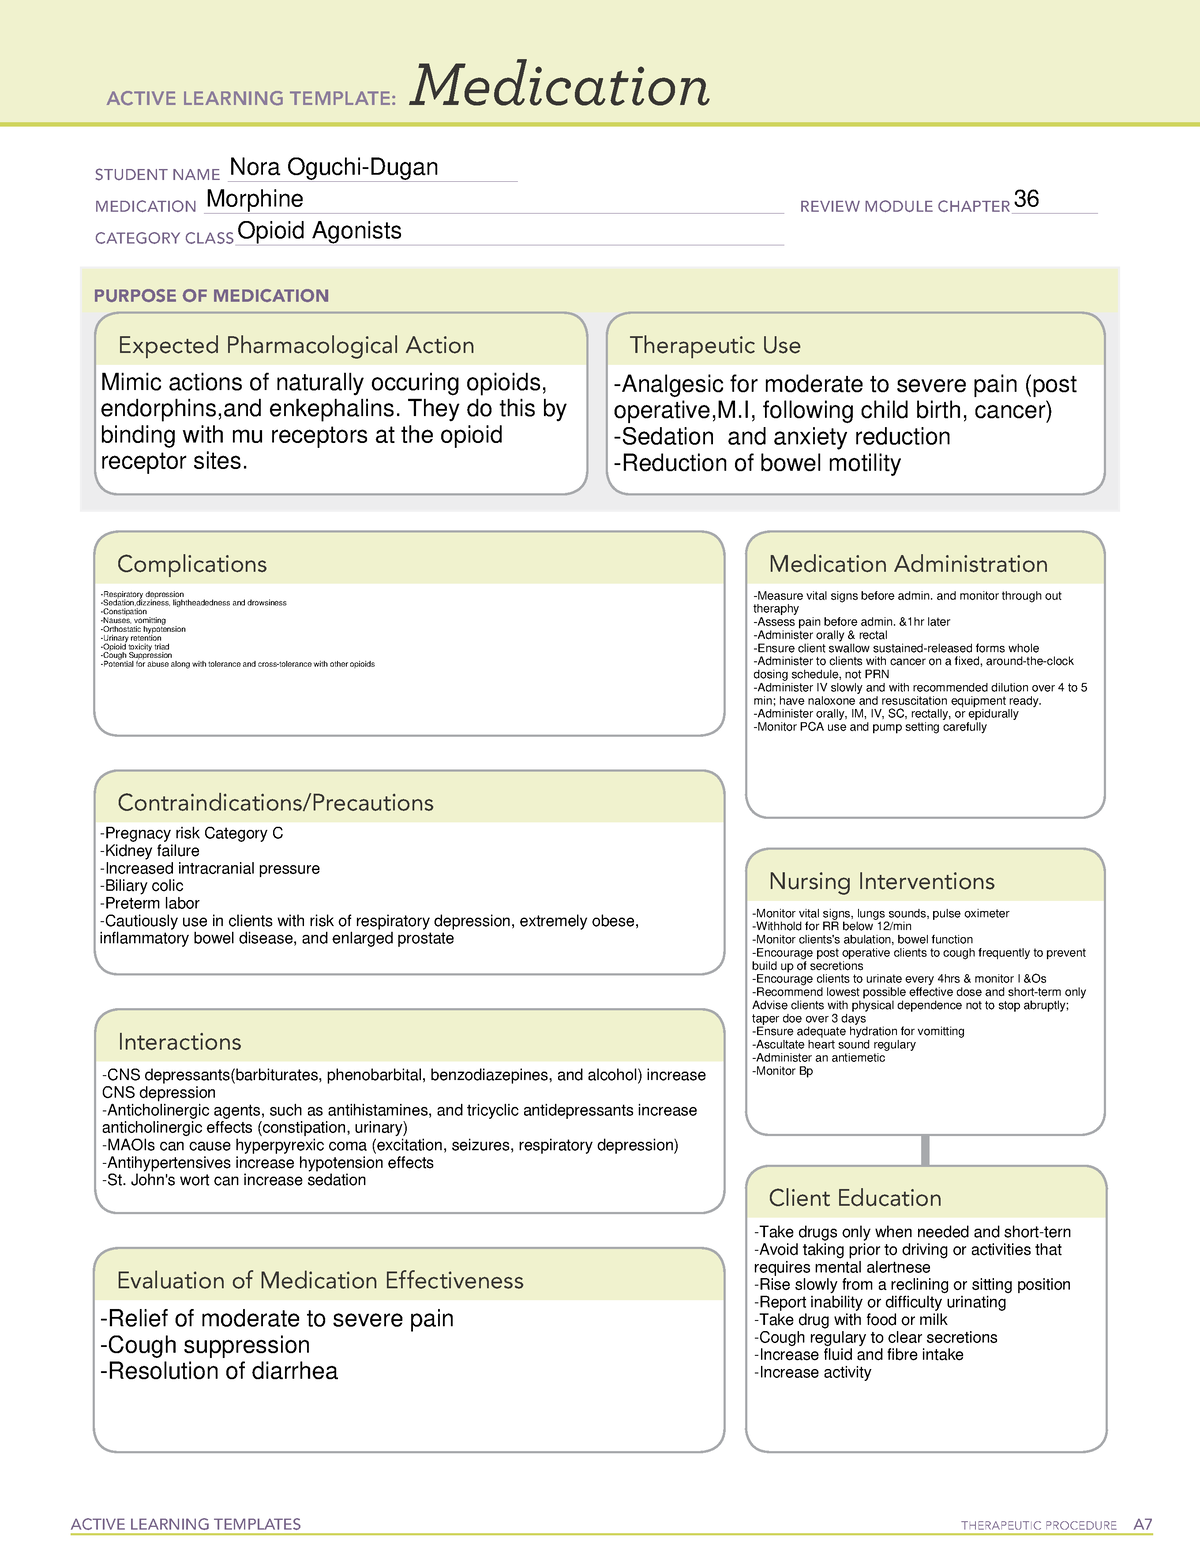 Morphine Medication Template ACTIVE LEARNING TEMPLATES THERAPEUTIC